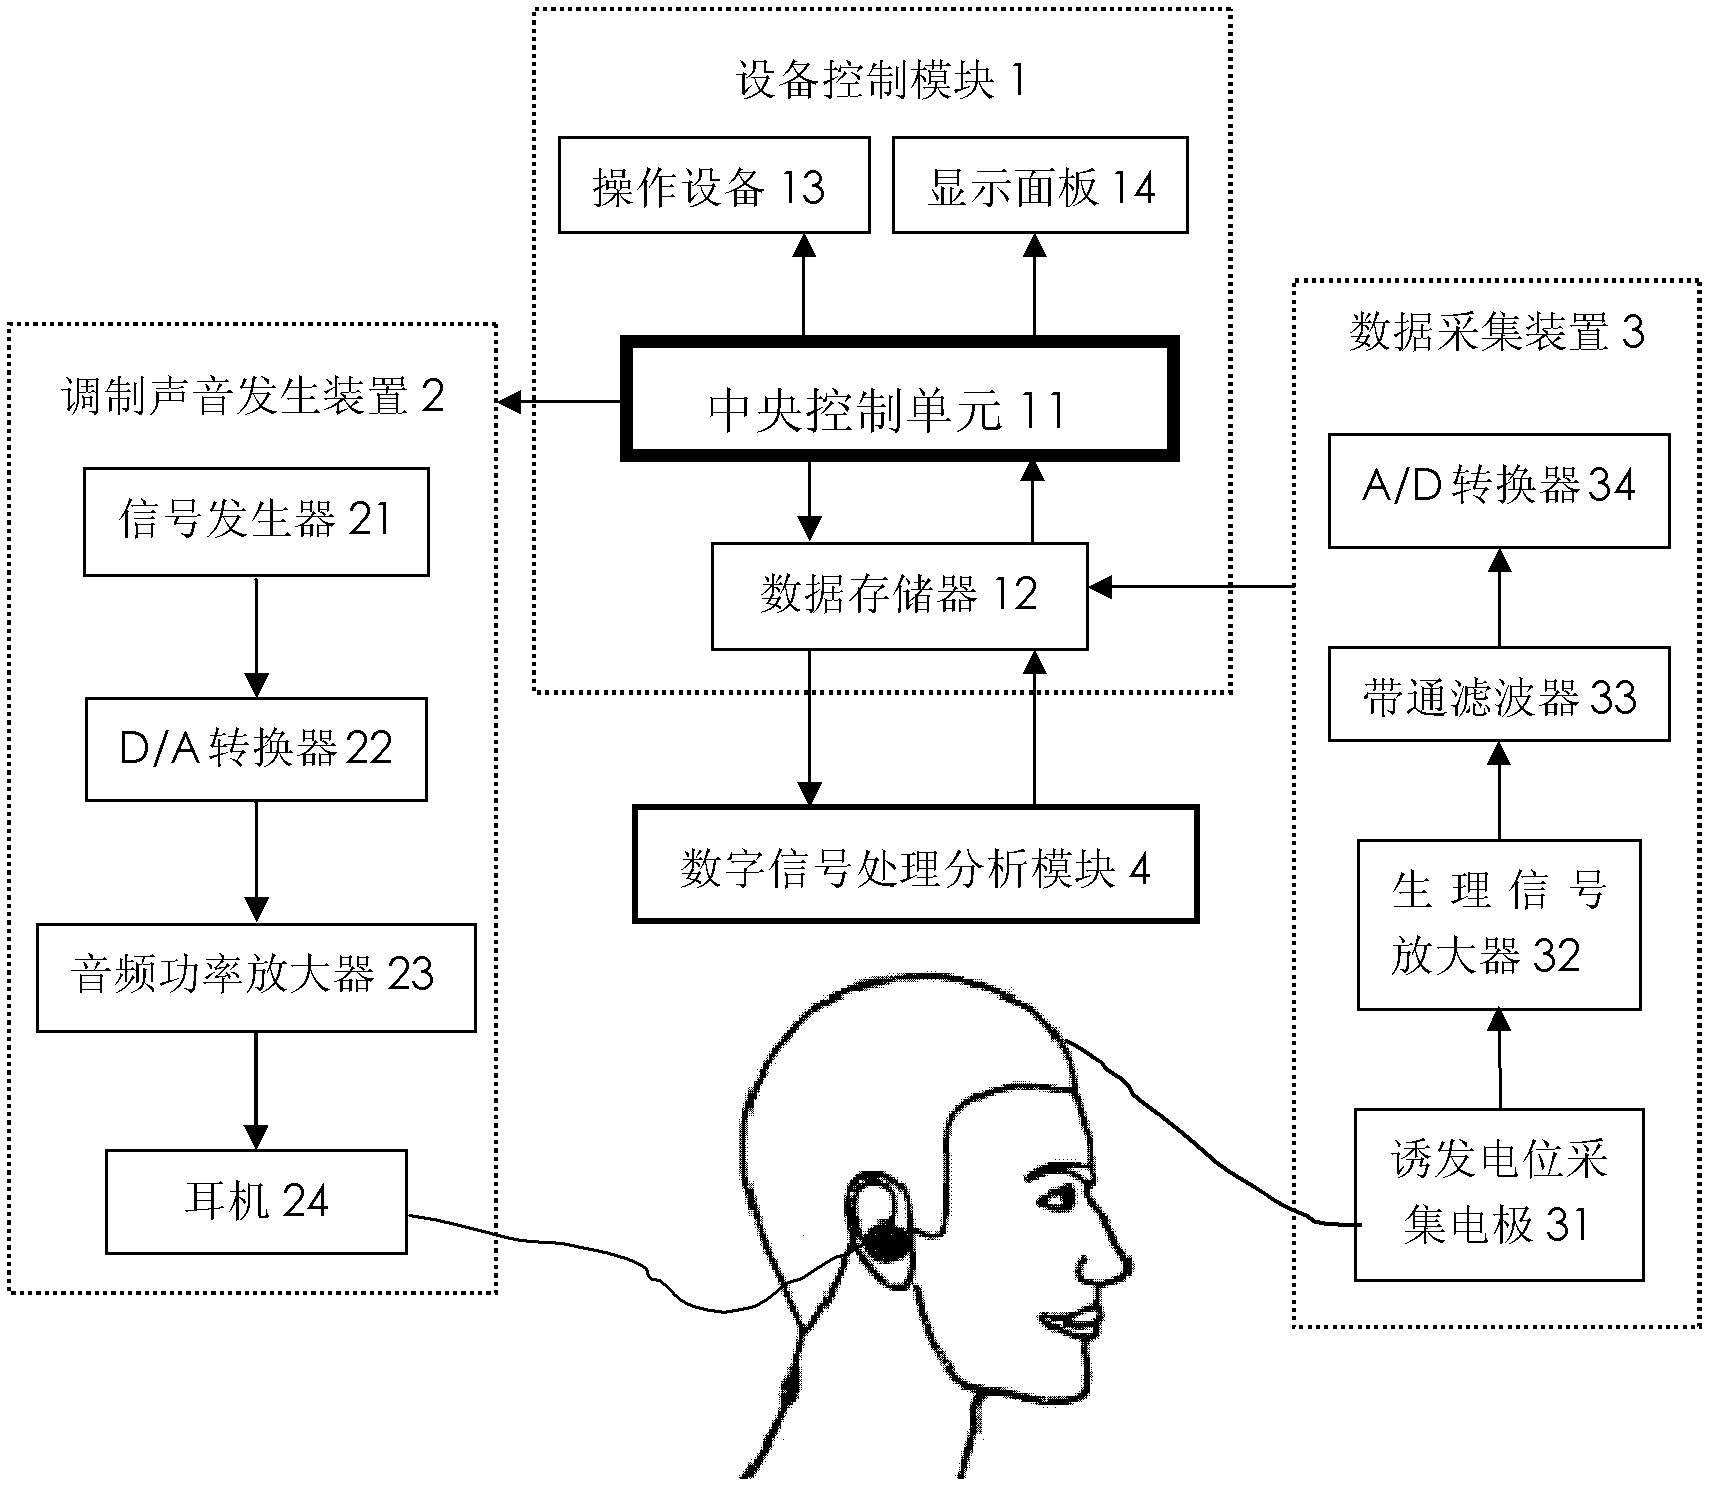 Audiometry device based on over-sampled multi-frequency multi-amplitude joint estimated auditory evoke potentials